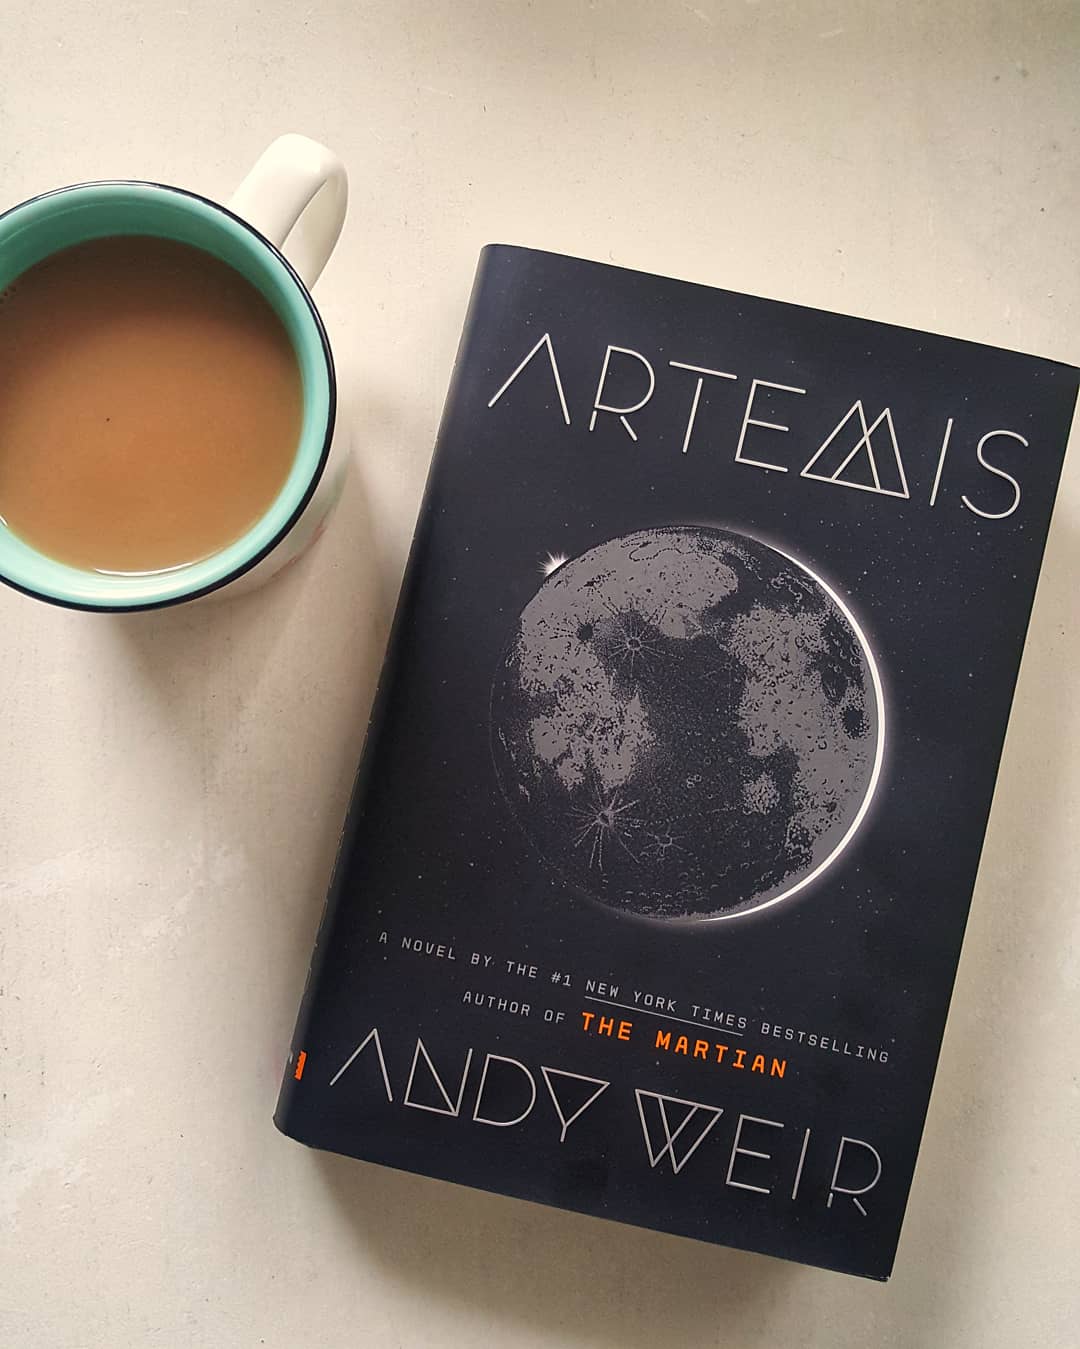 2: Artemis by Andy Weir